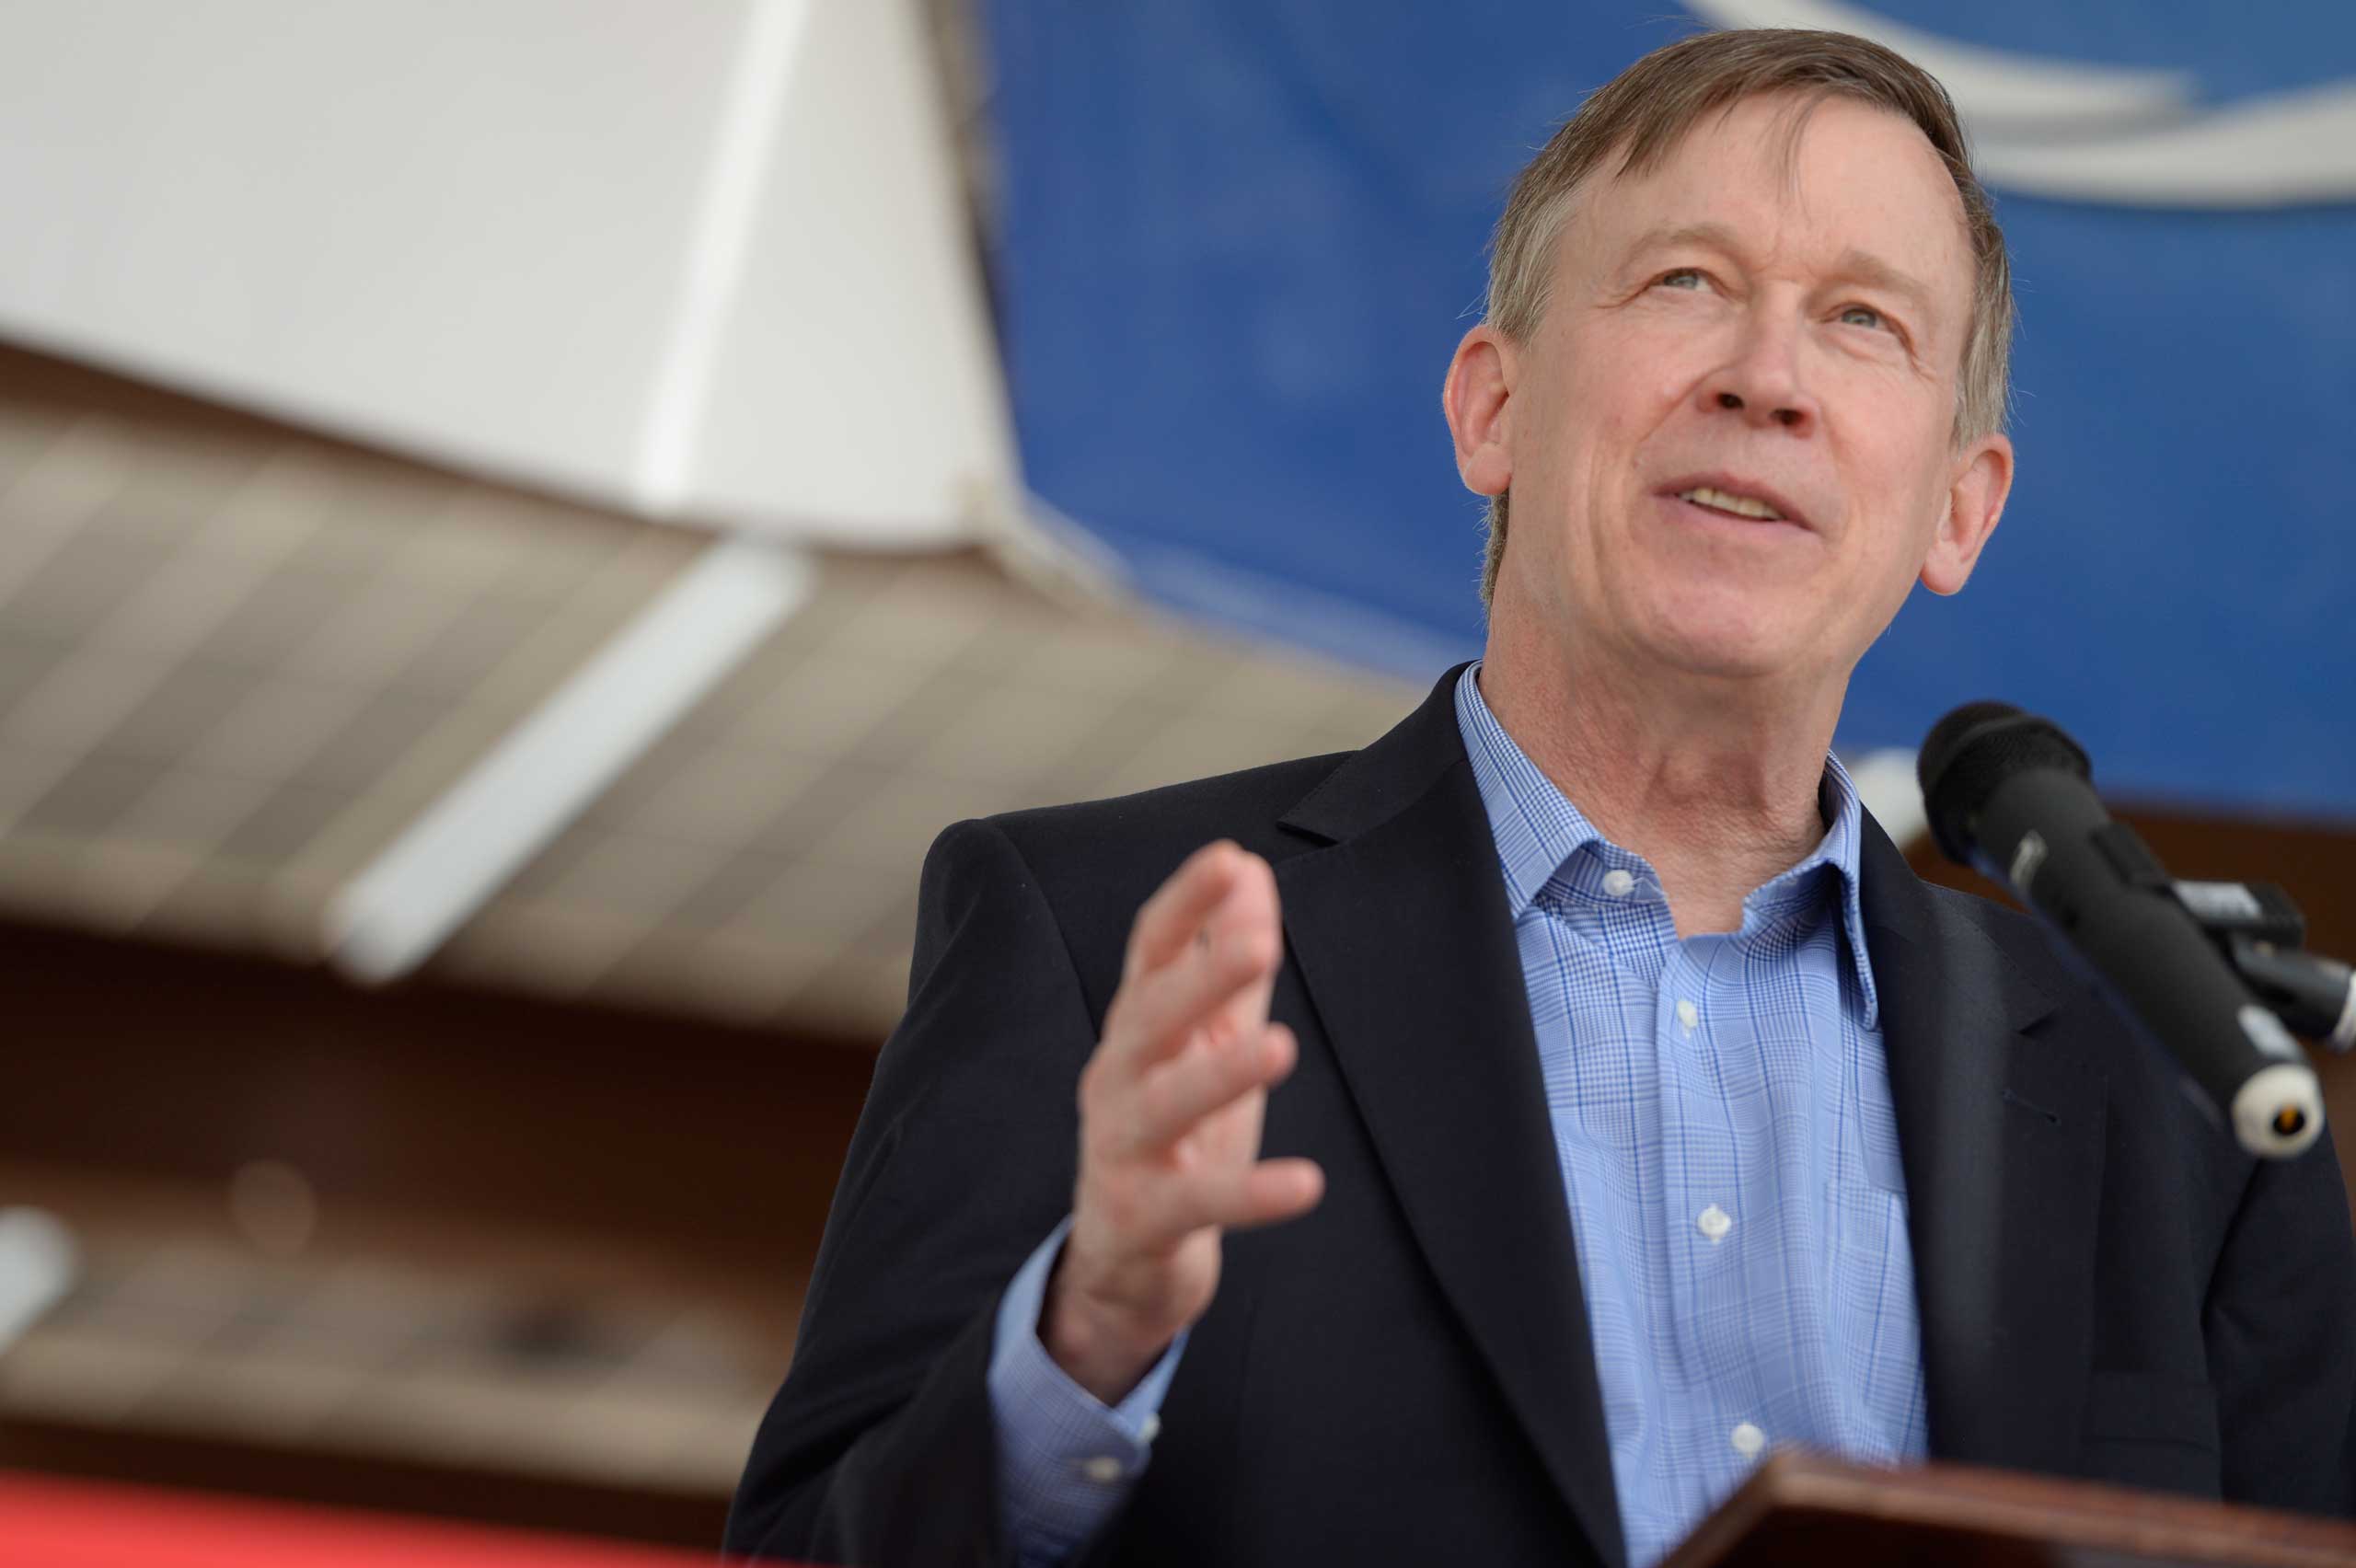 Governor John Hickenlooper talks about the new 1MW solar array Thursday, May 14, 2015 at the Intel Corporation in Fort Collins, Colorado. (Brent Lewis—Denver Post/Getty Images Governor John Hickenlooper talks about the new 1MW solar array Thursday, May 14, 2015 at the Intel Corporation in Fort Collins, Colorado.)